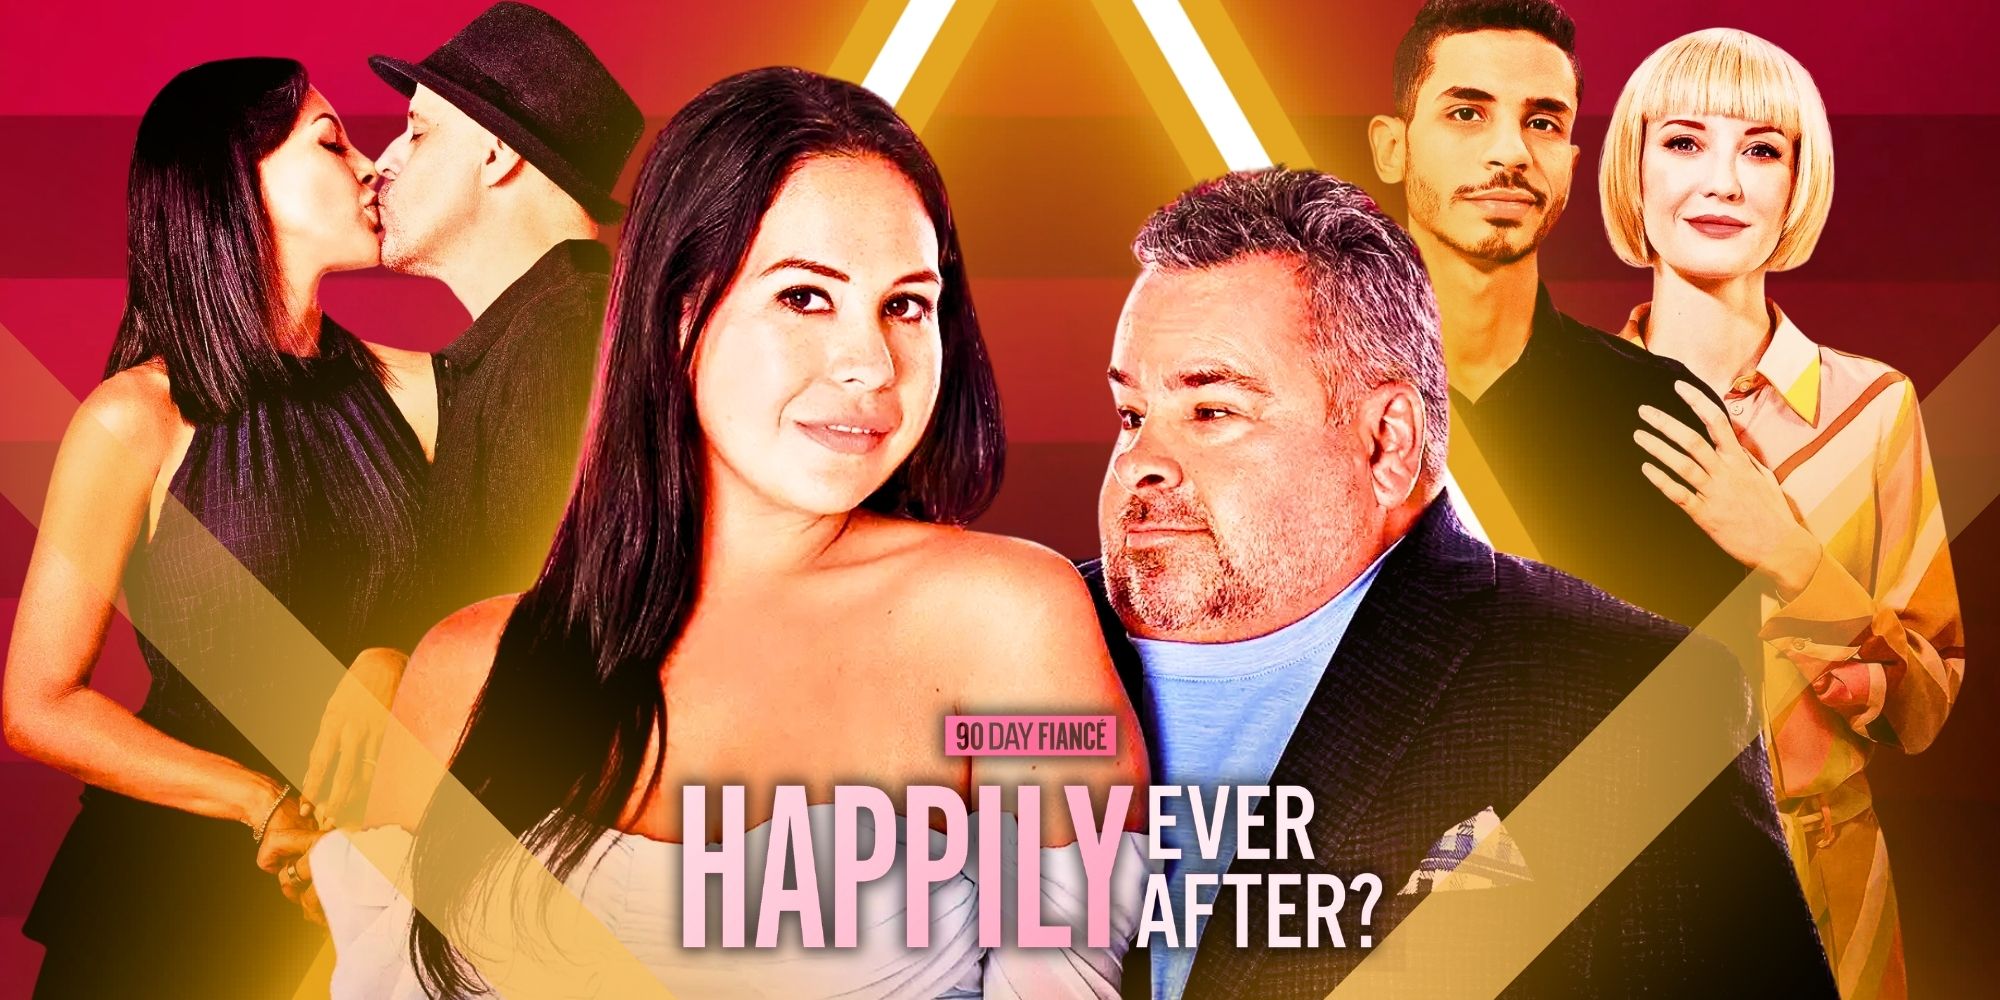 What To Expect From 90 Day Fiancé Happily Ever After Season 8